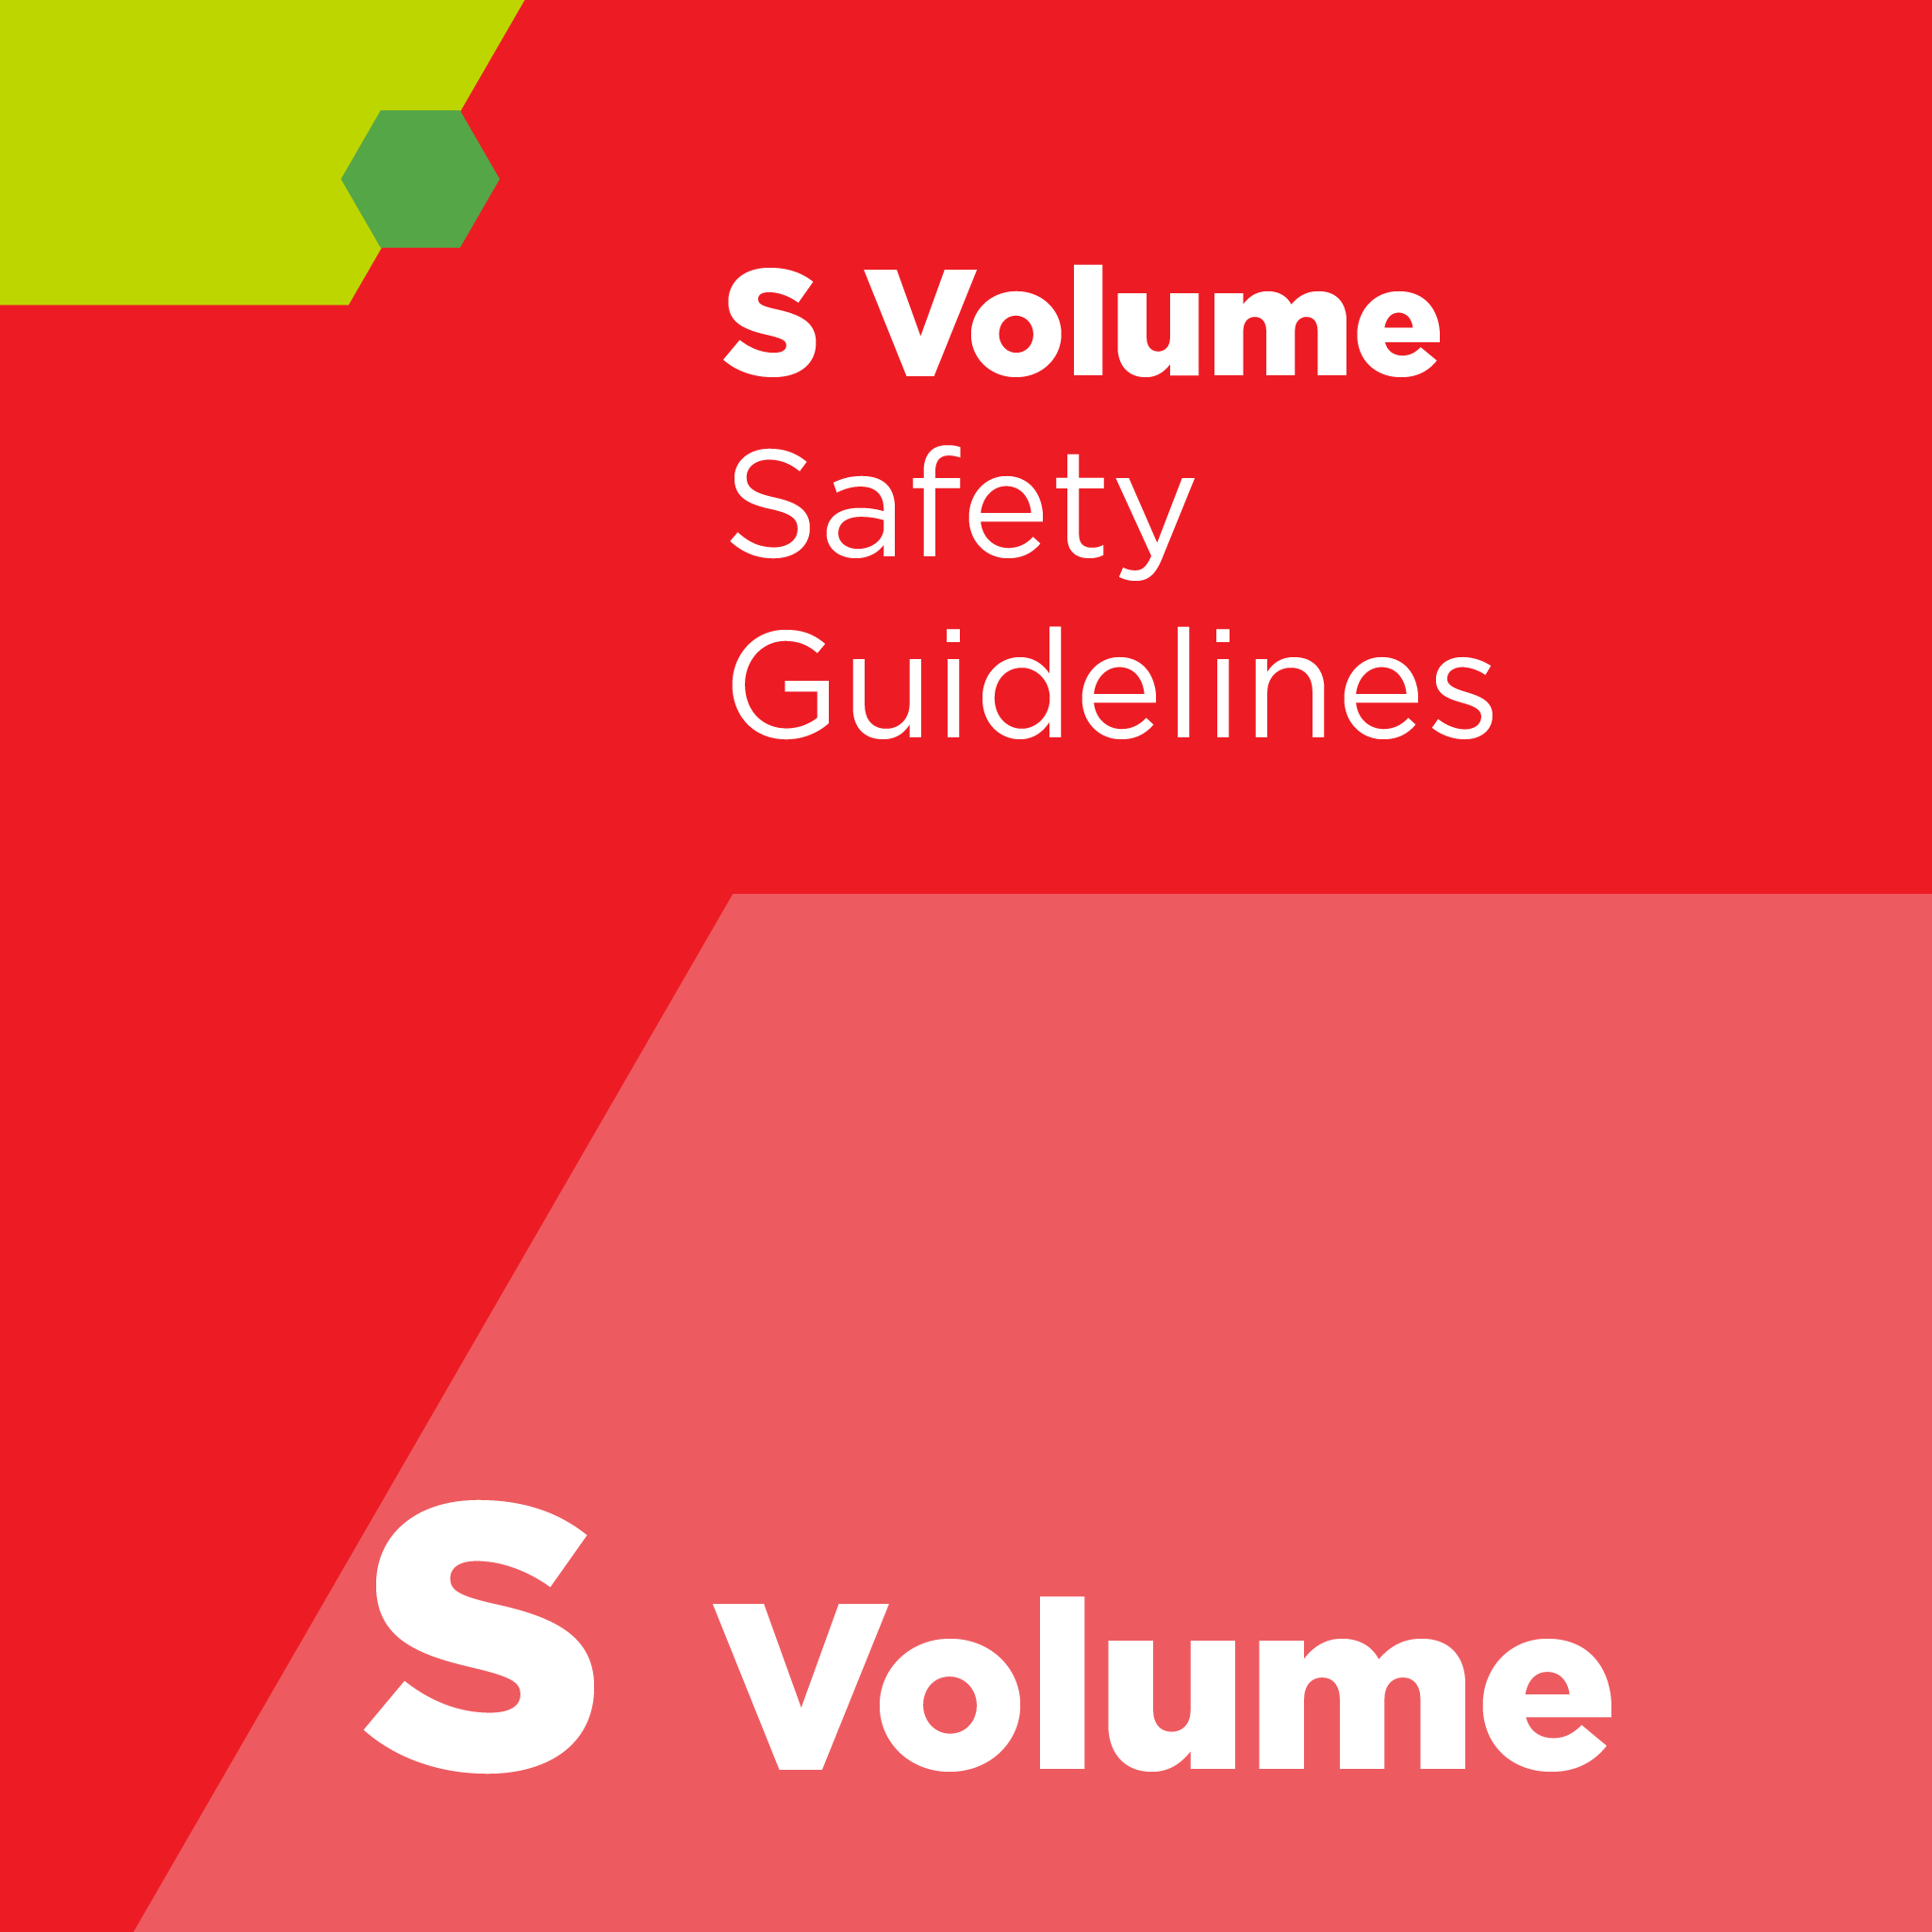 S01400 - SEMI S14 - Safety Guideline for Fire Risk Assessment and Mitigation for Semiconductor Manufacturing Equipment